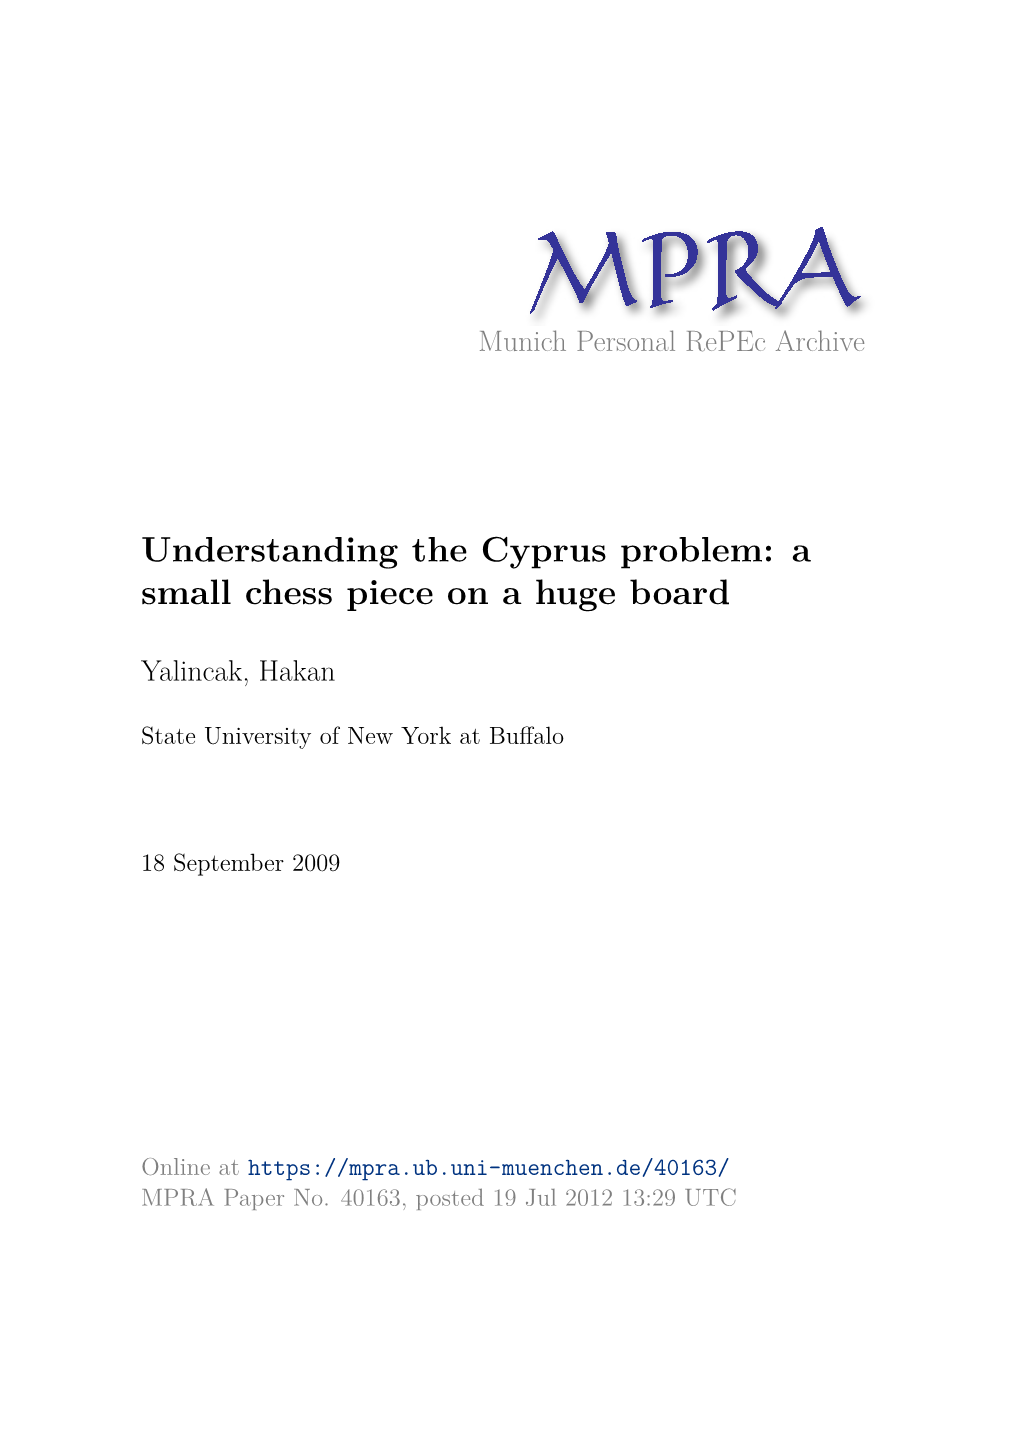 Understanding the Cyprus Problem: a Small Chess Piece on a Huge Board